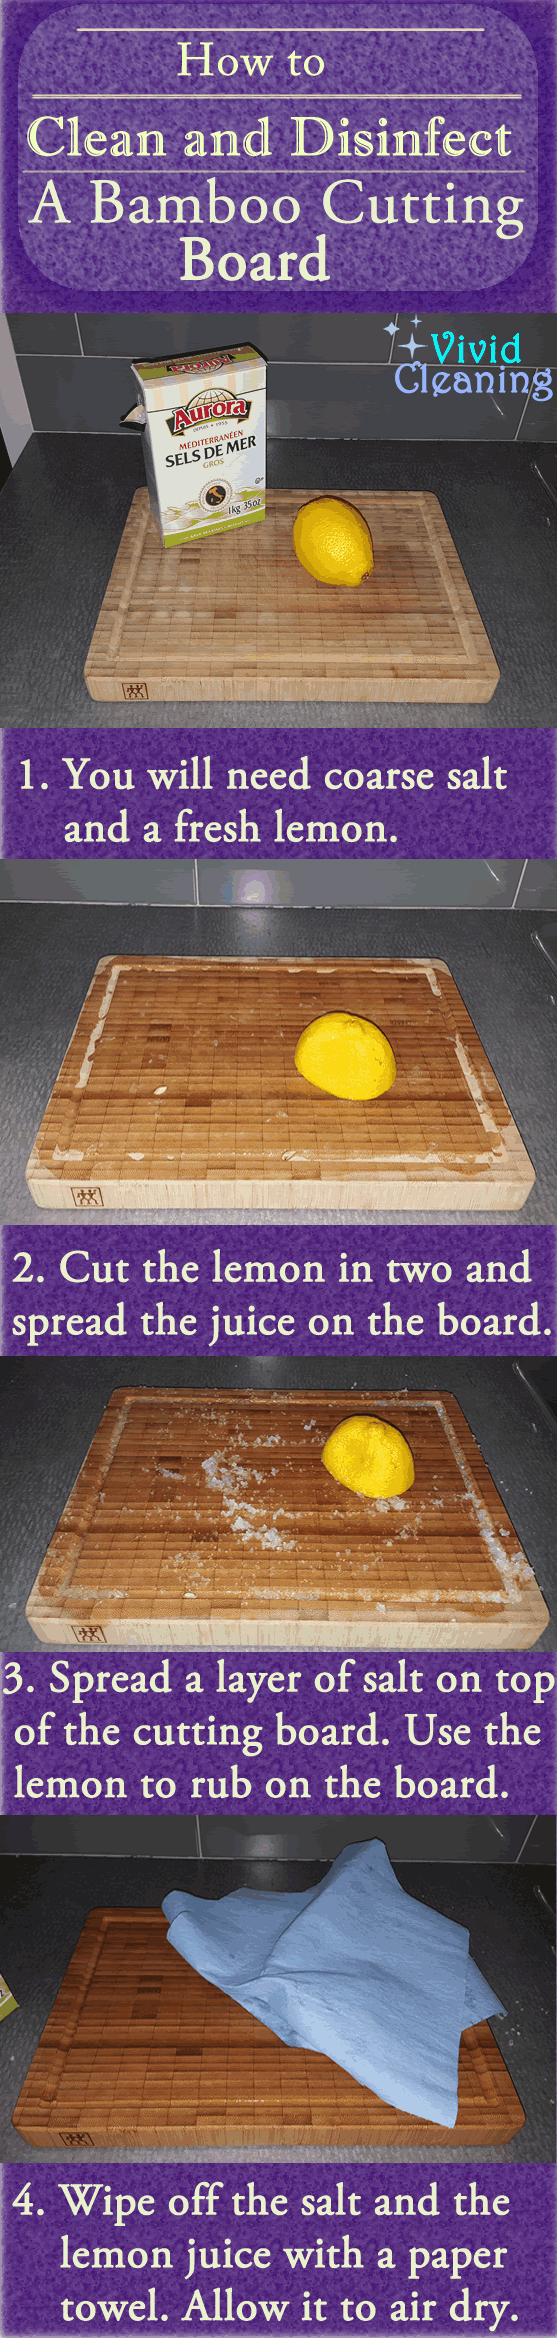 Cleaning Cutting Boards 